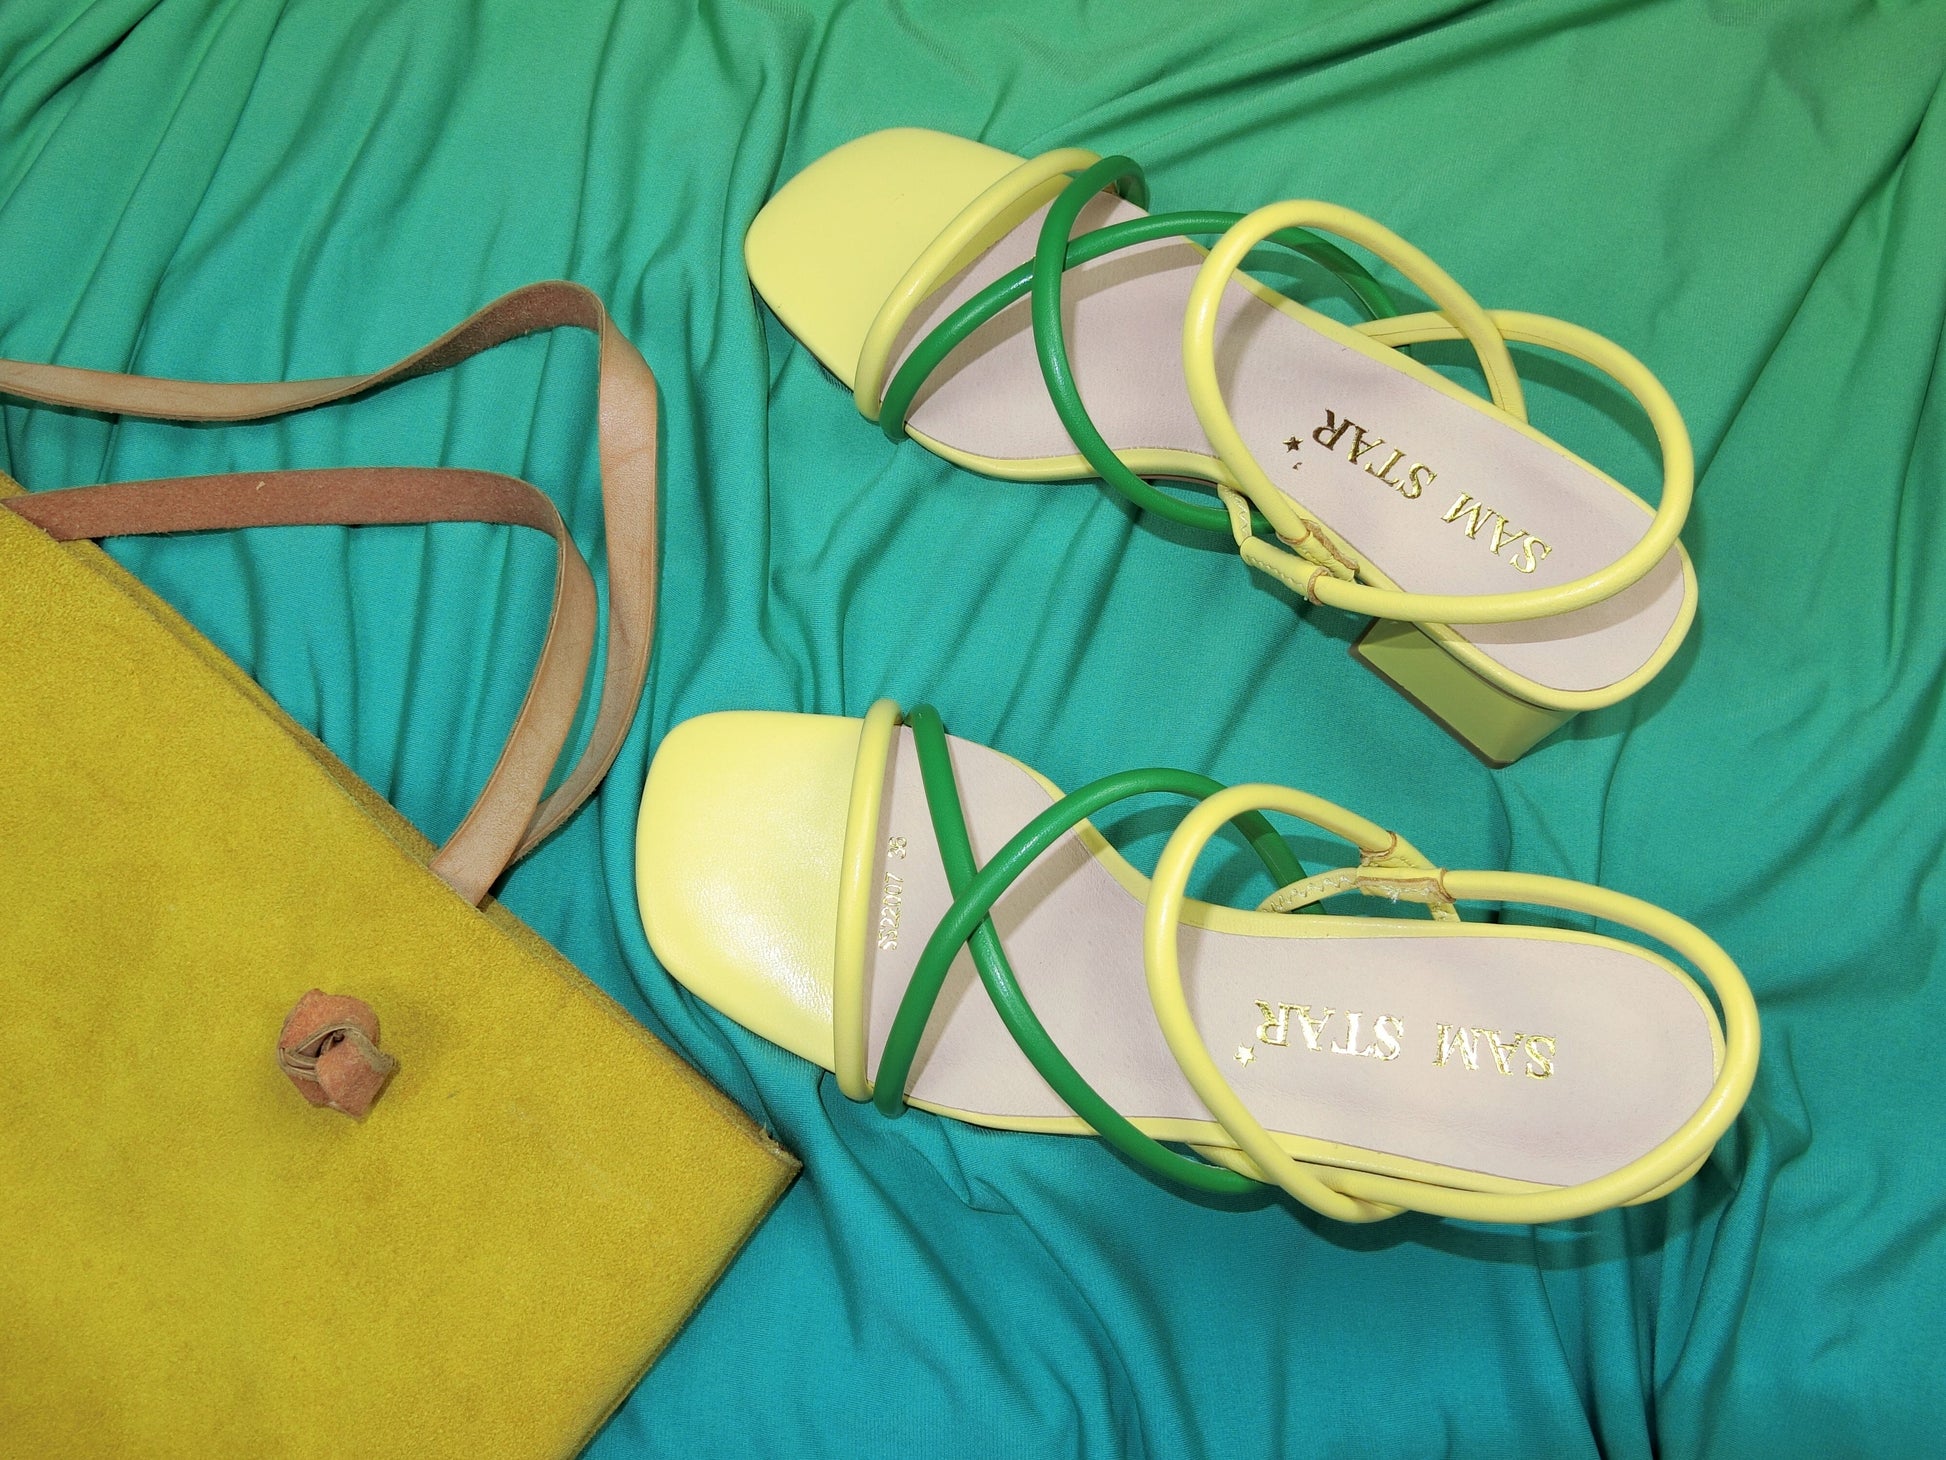 SS22008 Genuine leather strappy block heel sandals in Green and Yellow